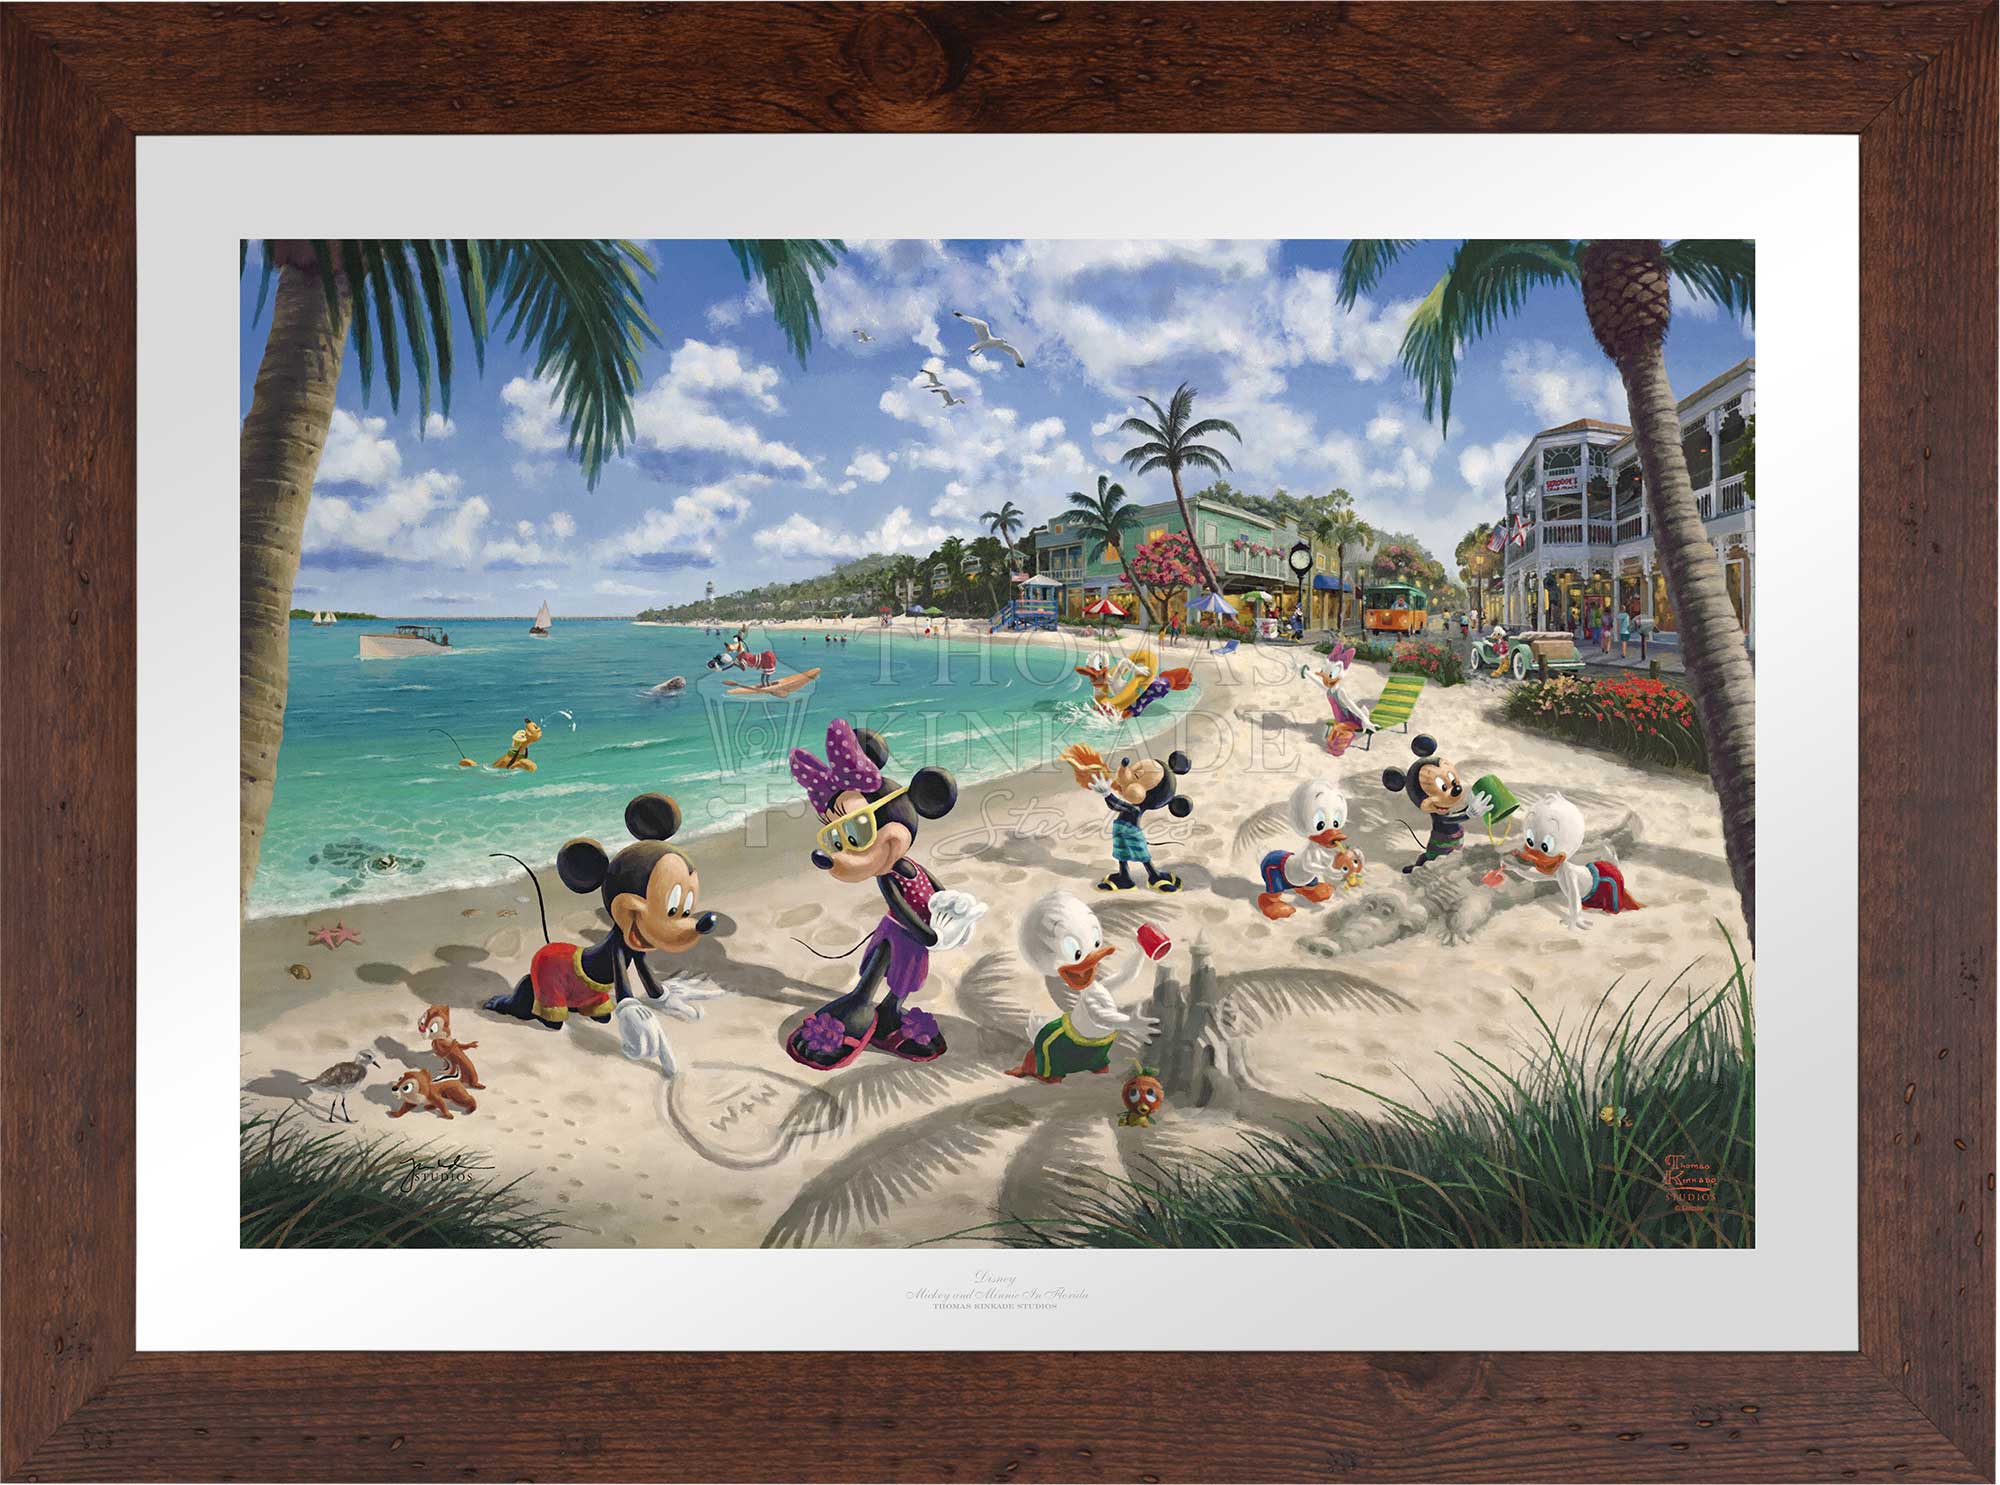 In this scene, Mickey Mouse and Minnie Mouse enjoy a warm afternoon on a sandy Key West beach with family and friends, - Wildwood Frame